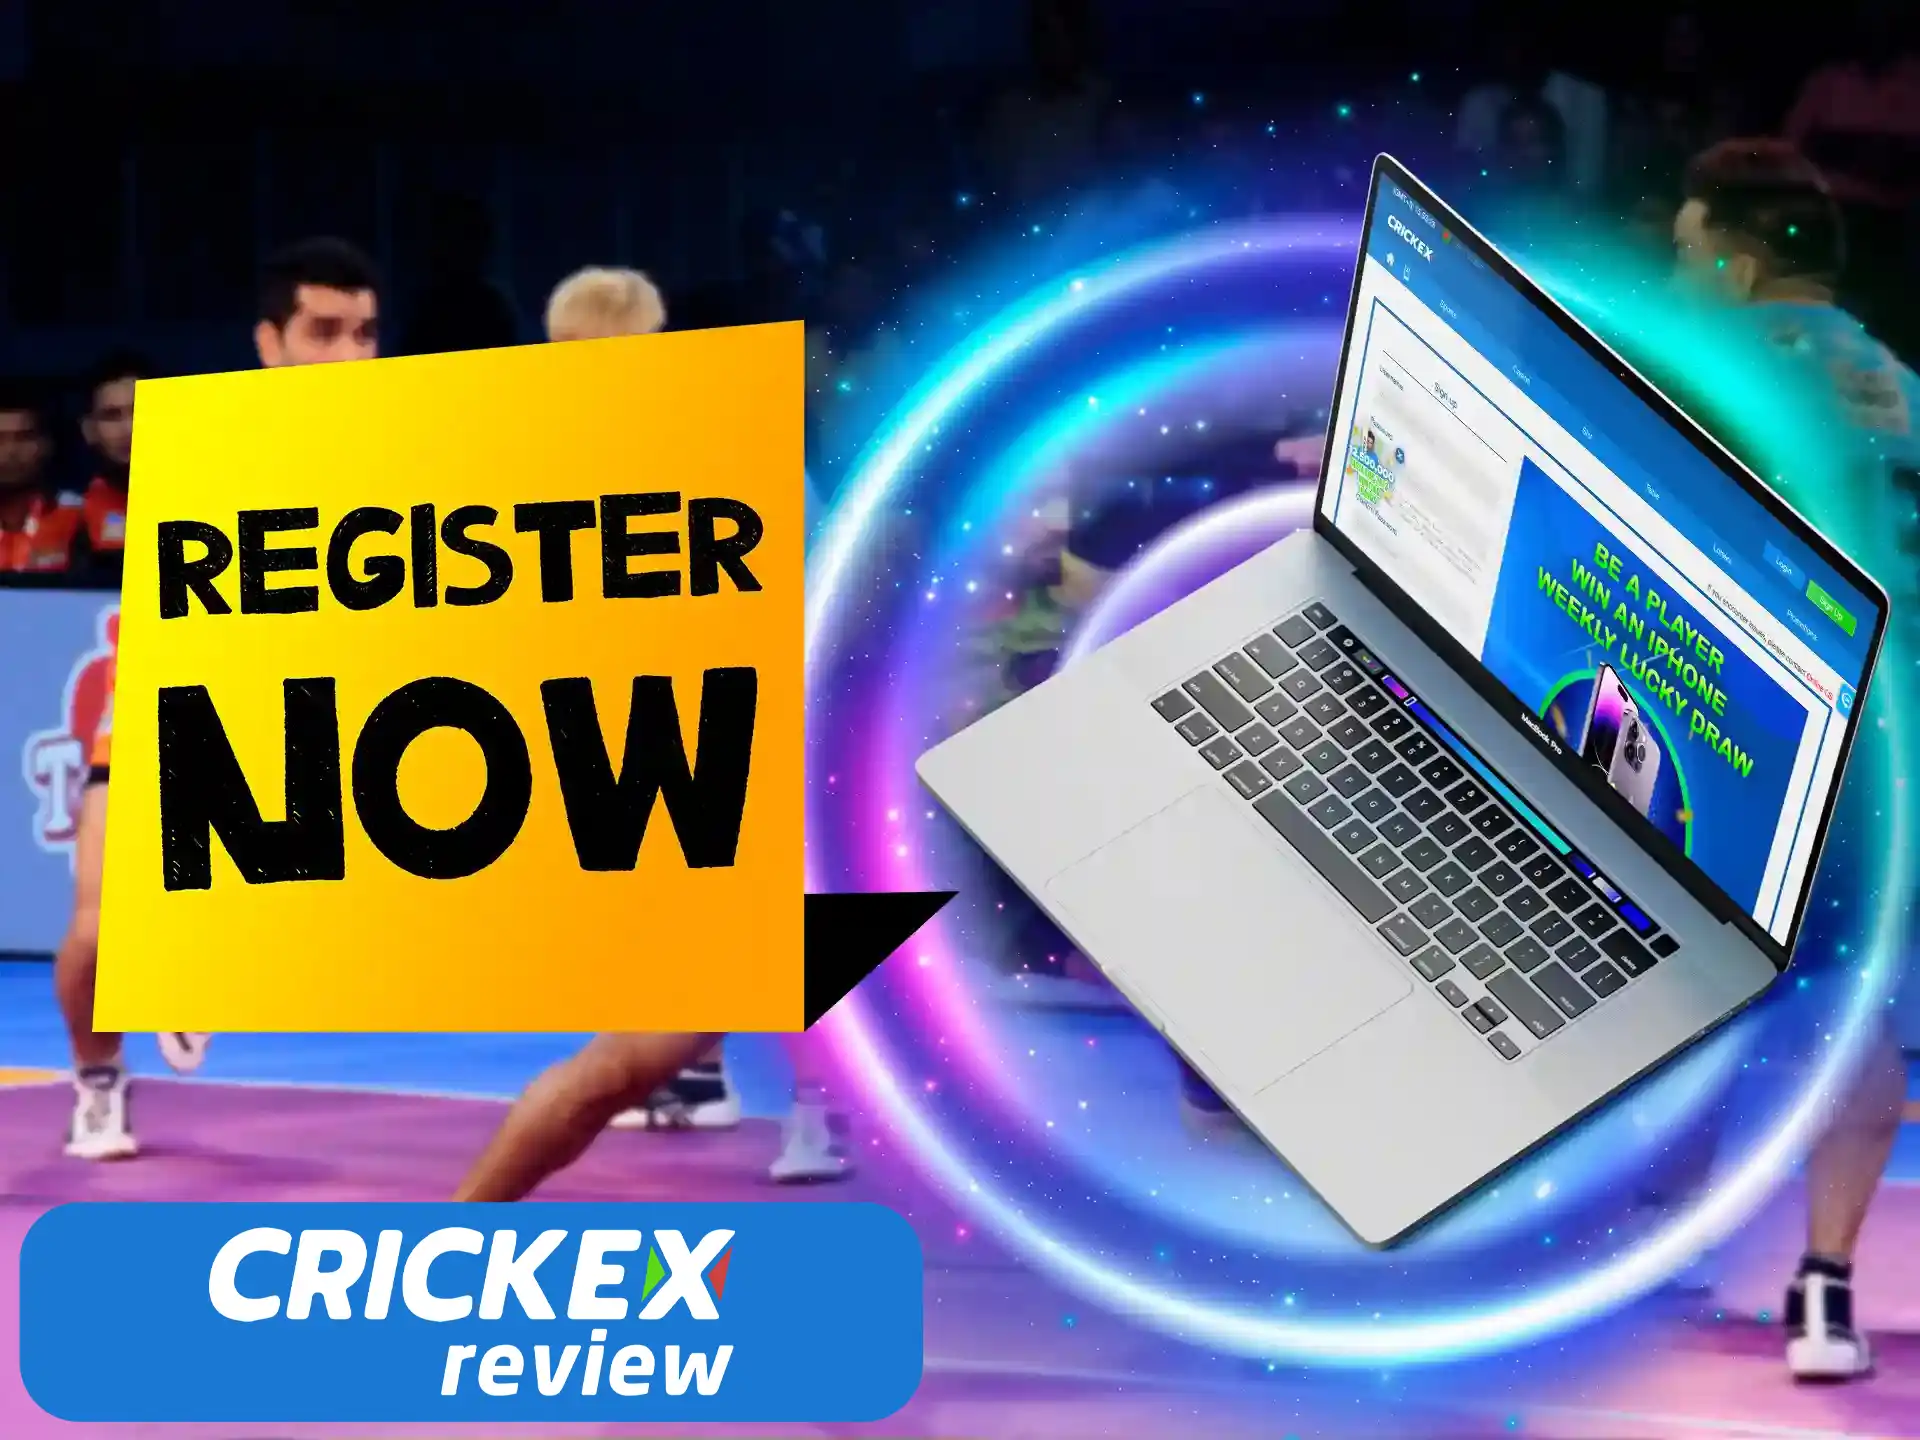 Go to the Crickex website and start the registration process.